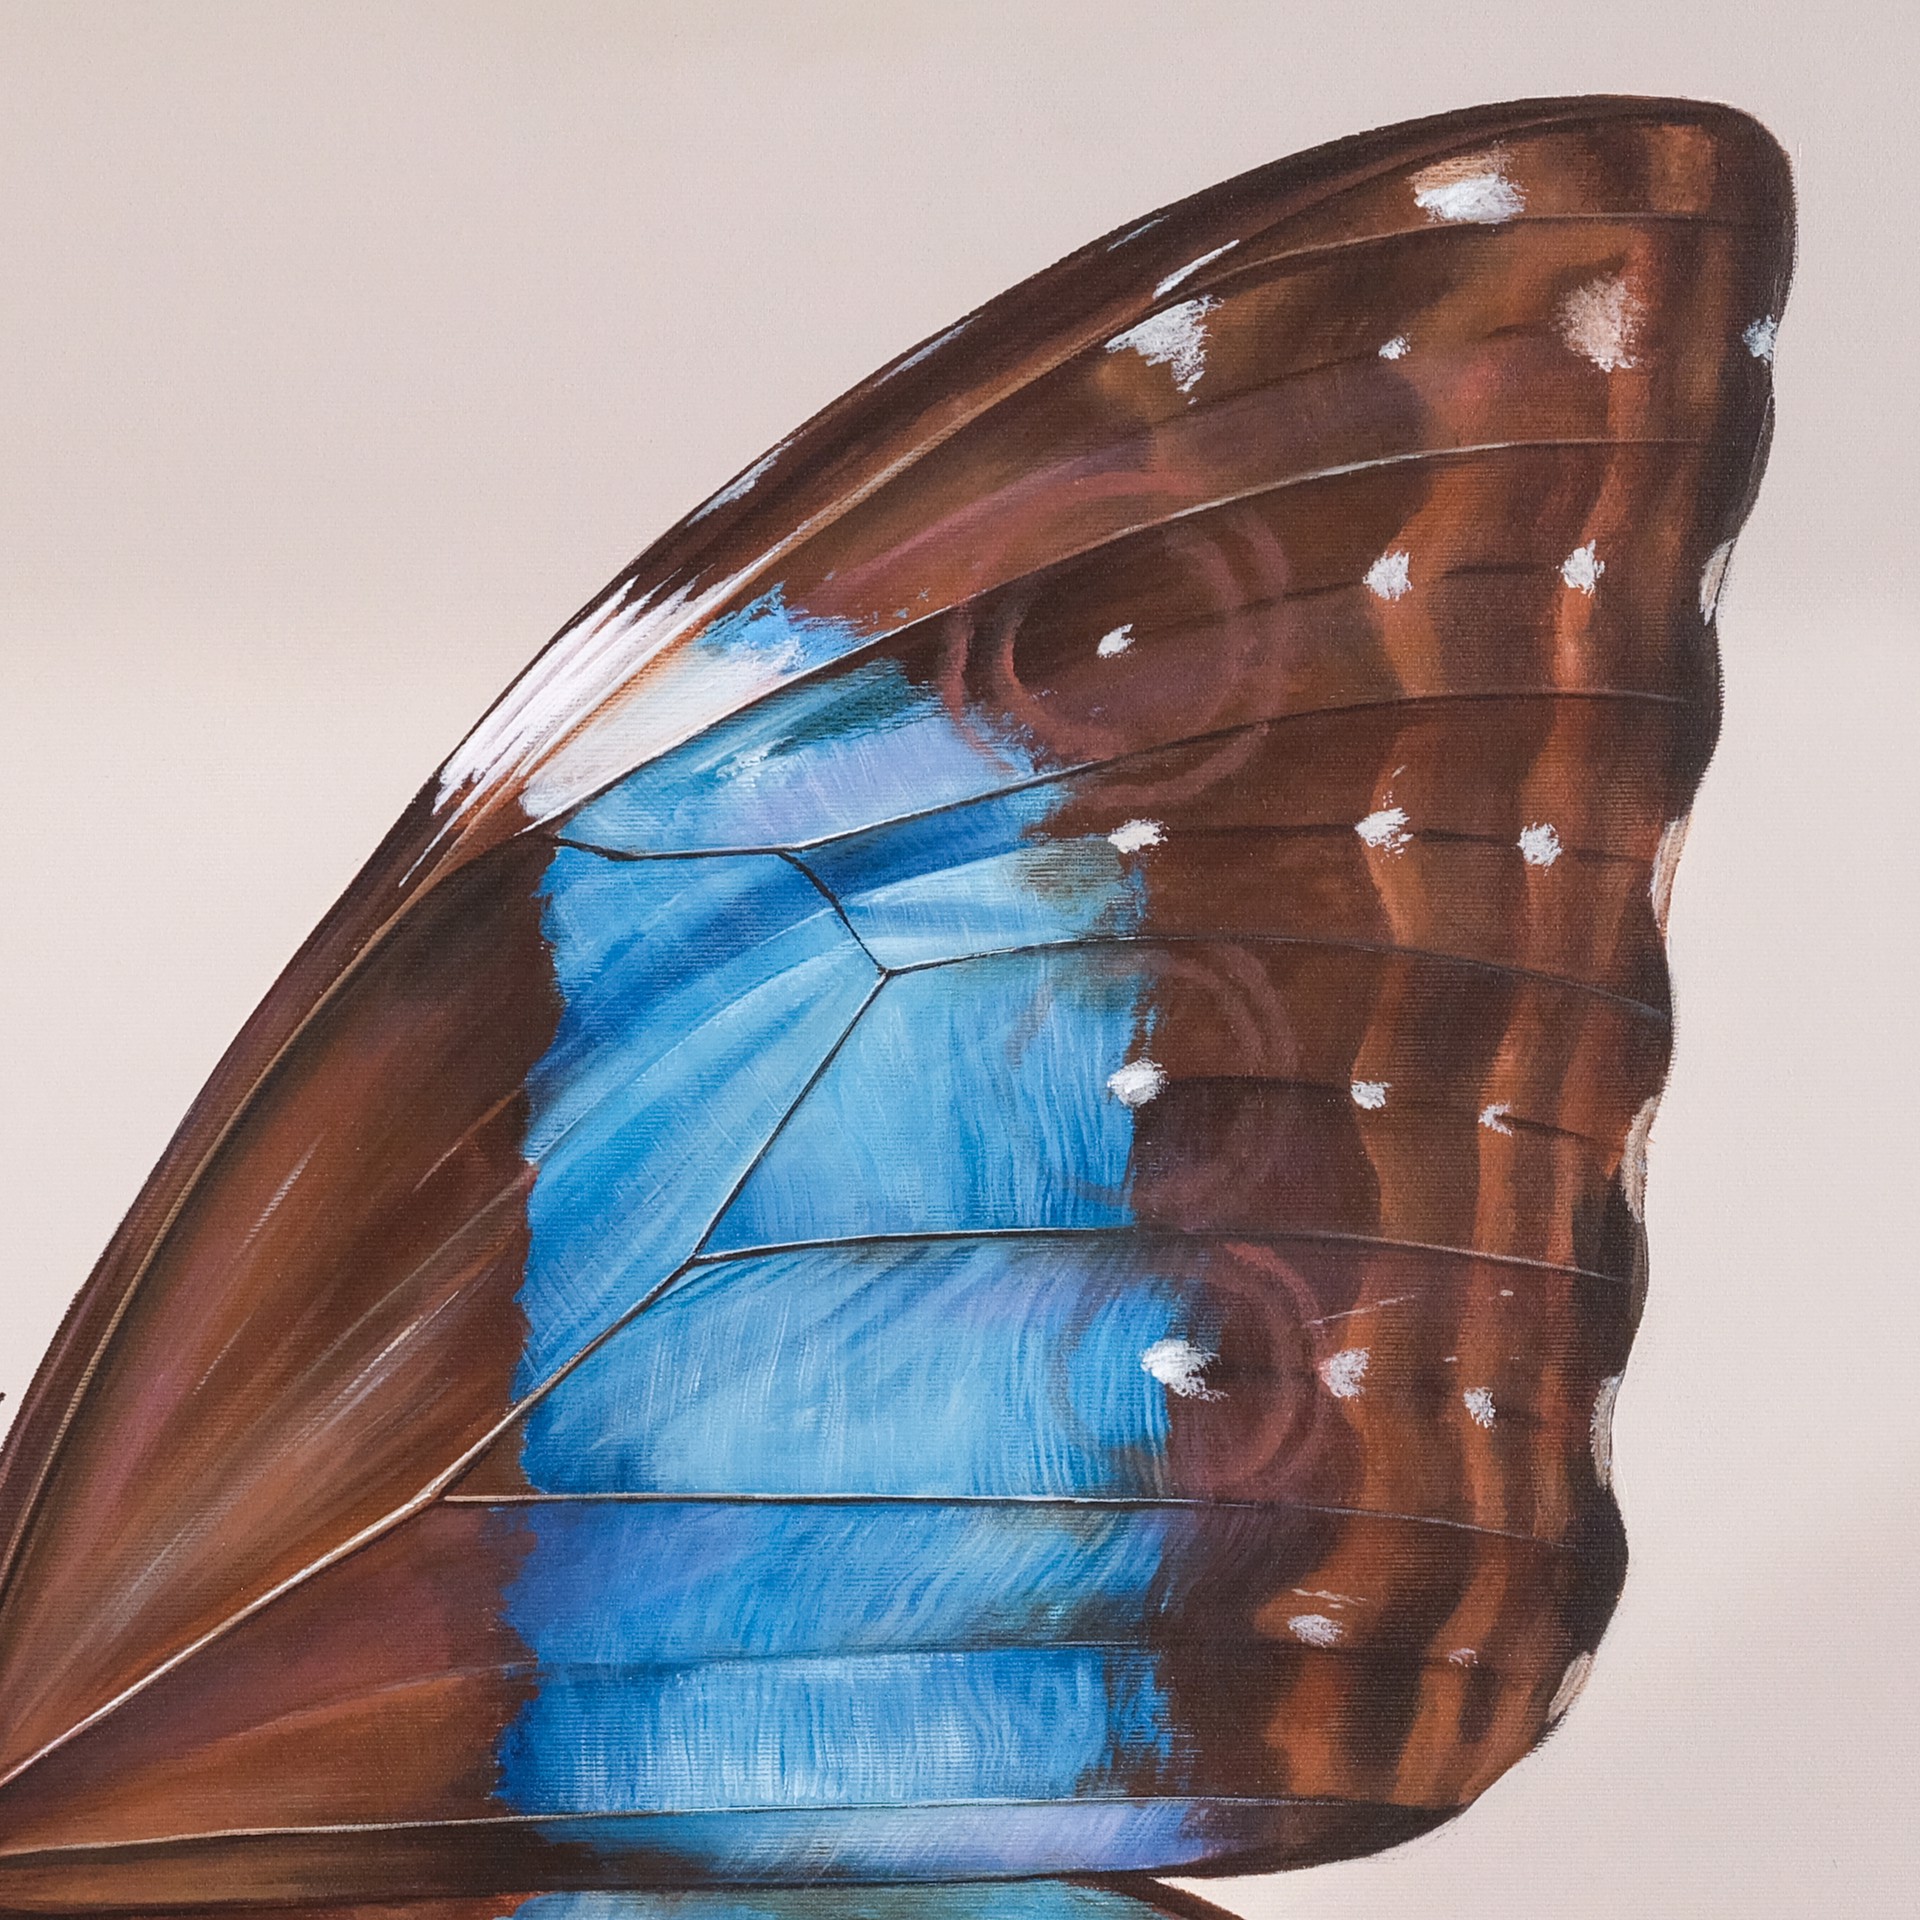 The Square Collection : Morpho deidamia by Mantra